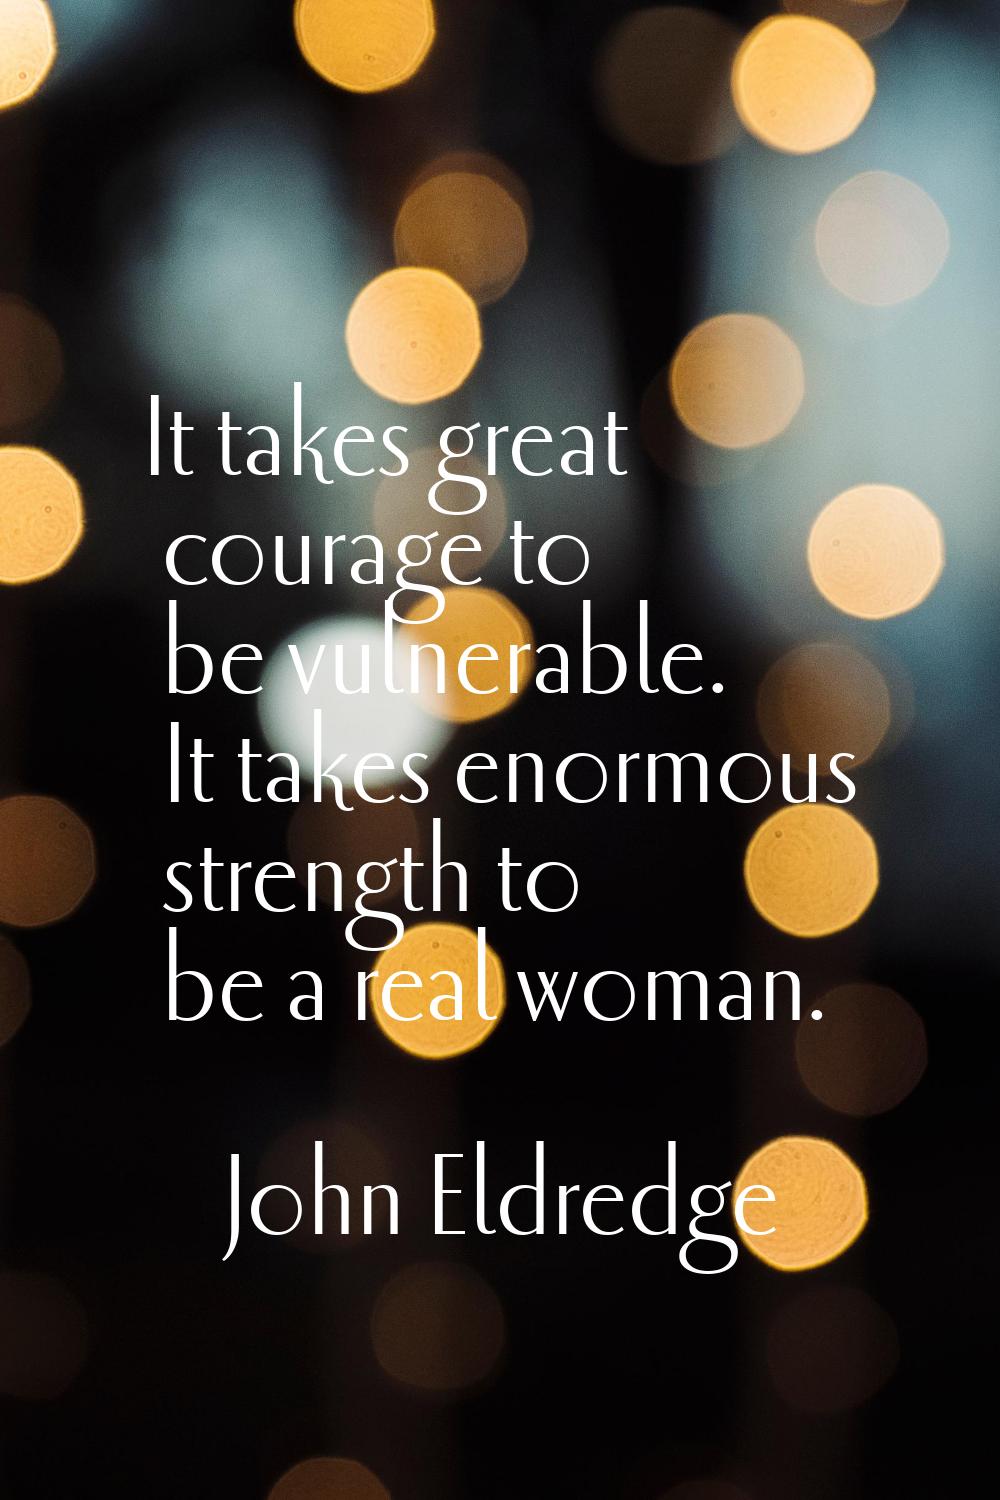 It takes great courage to be vulnerable. It takes enormous strength to be a real woman.